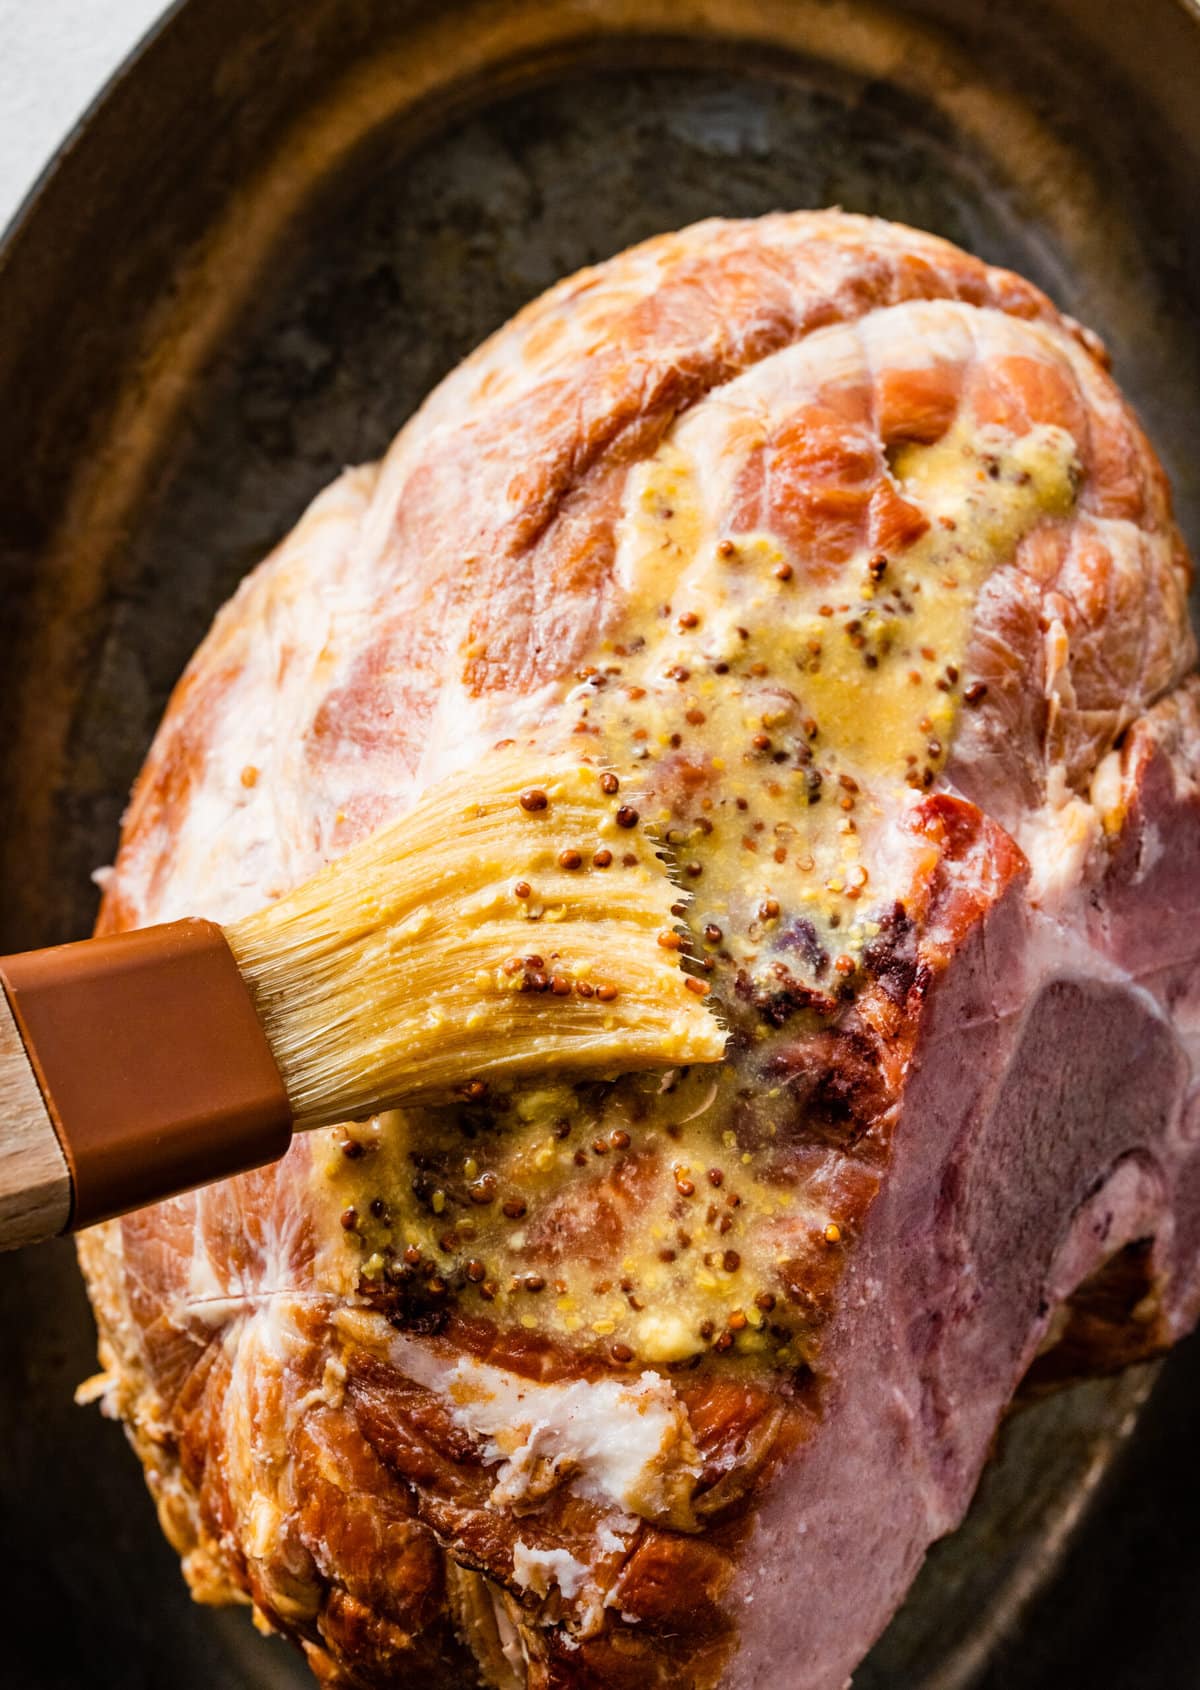 How to make baked ham with brown sugar glaze step-by-step: adding mustard mixture to the ham.